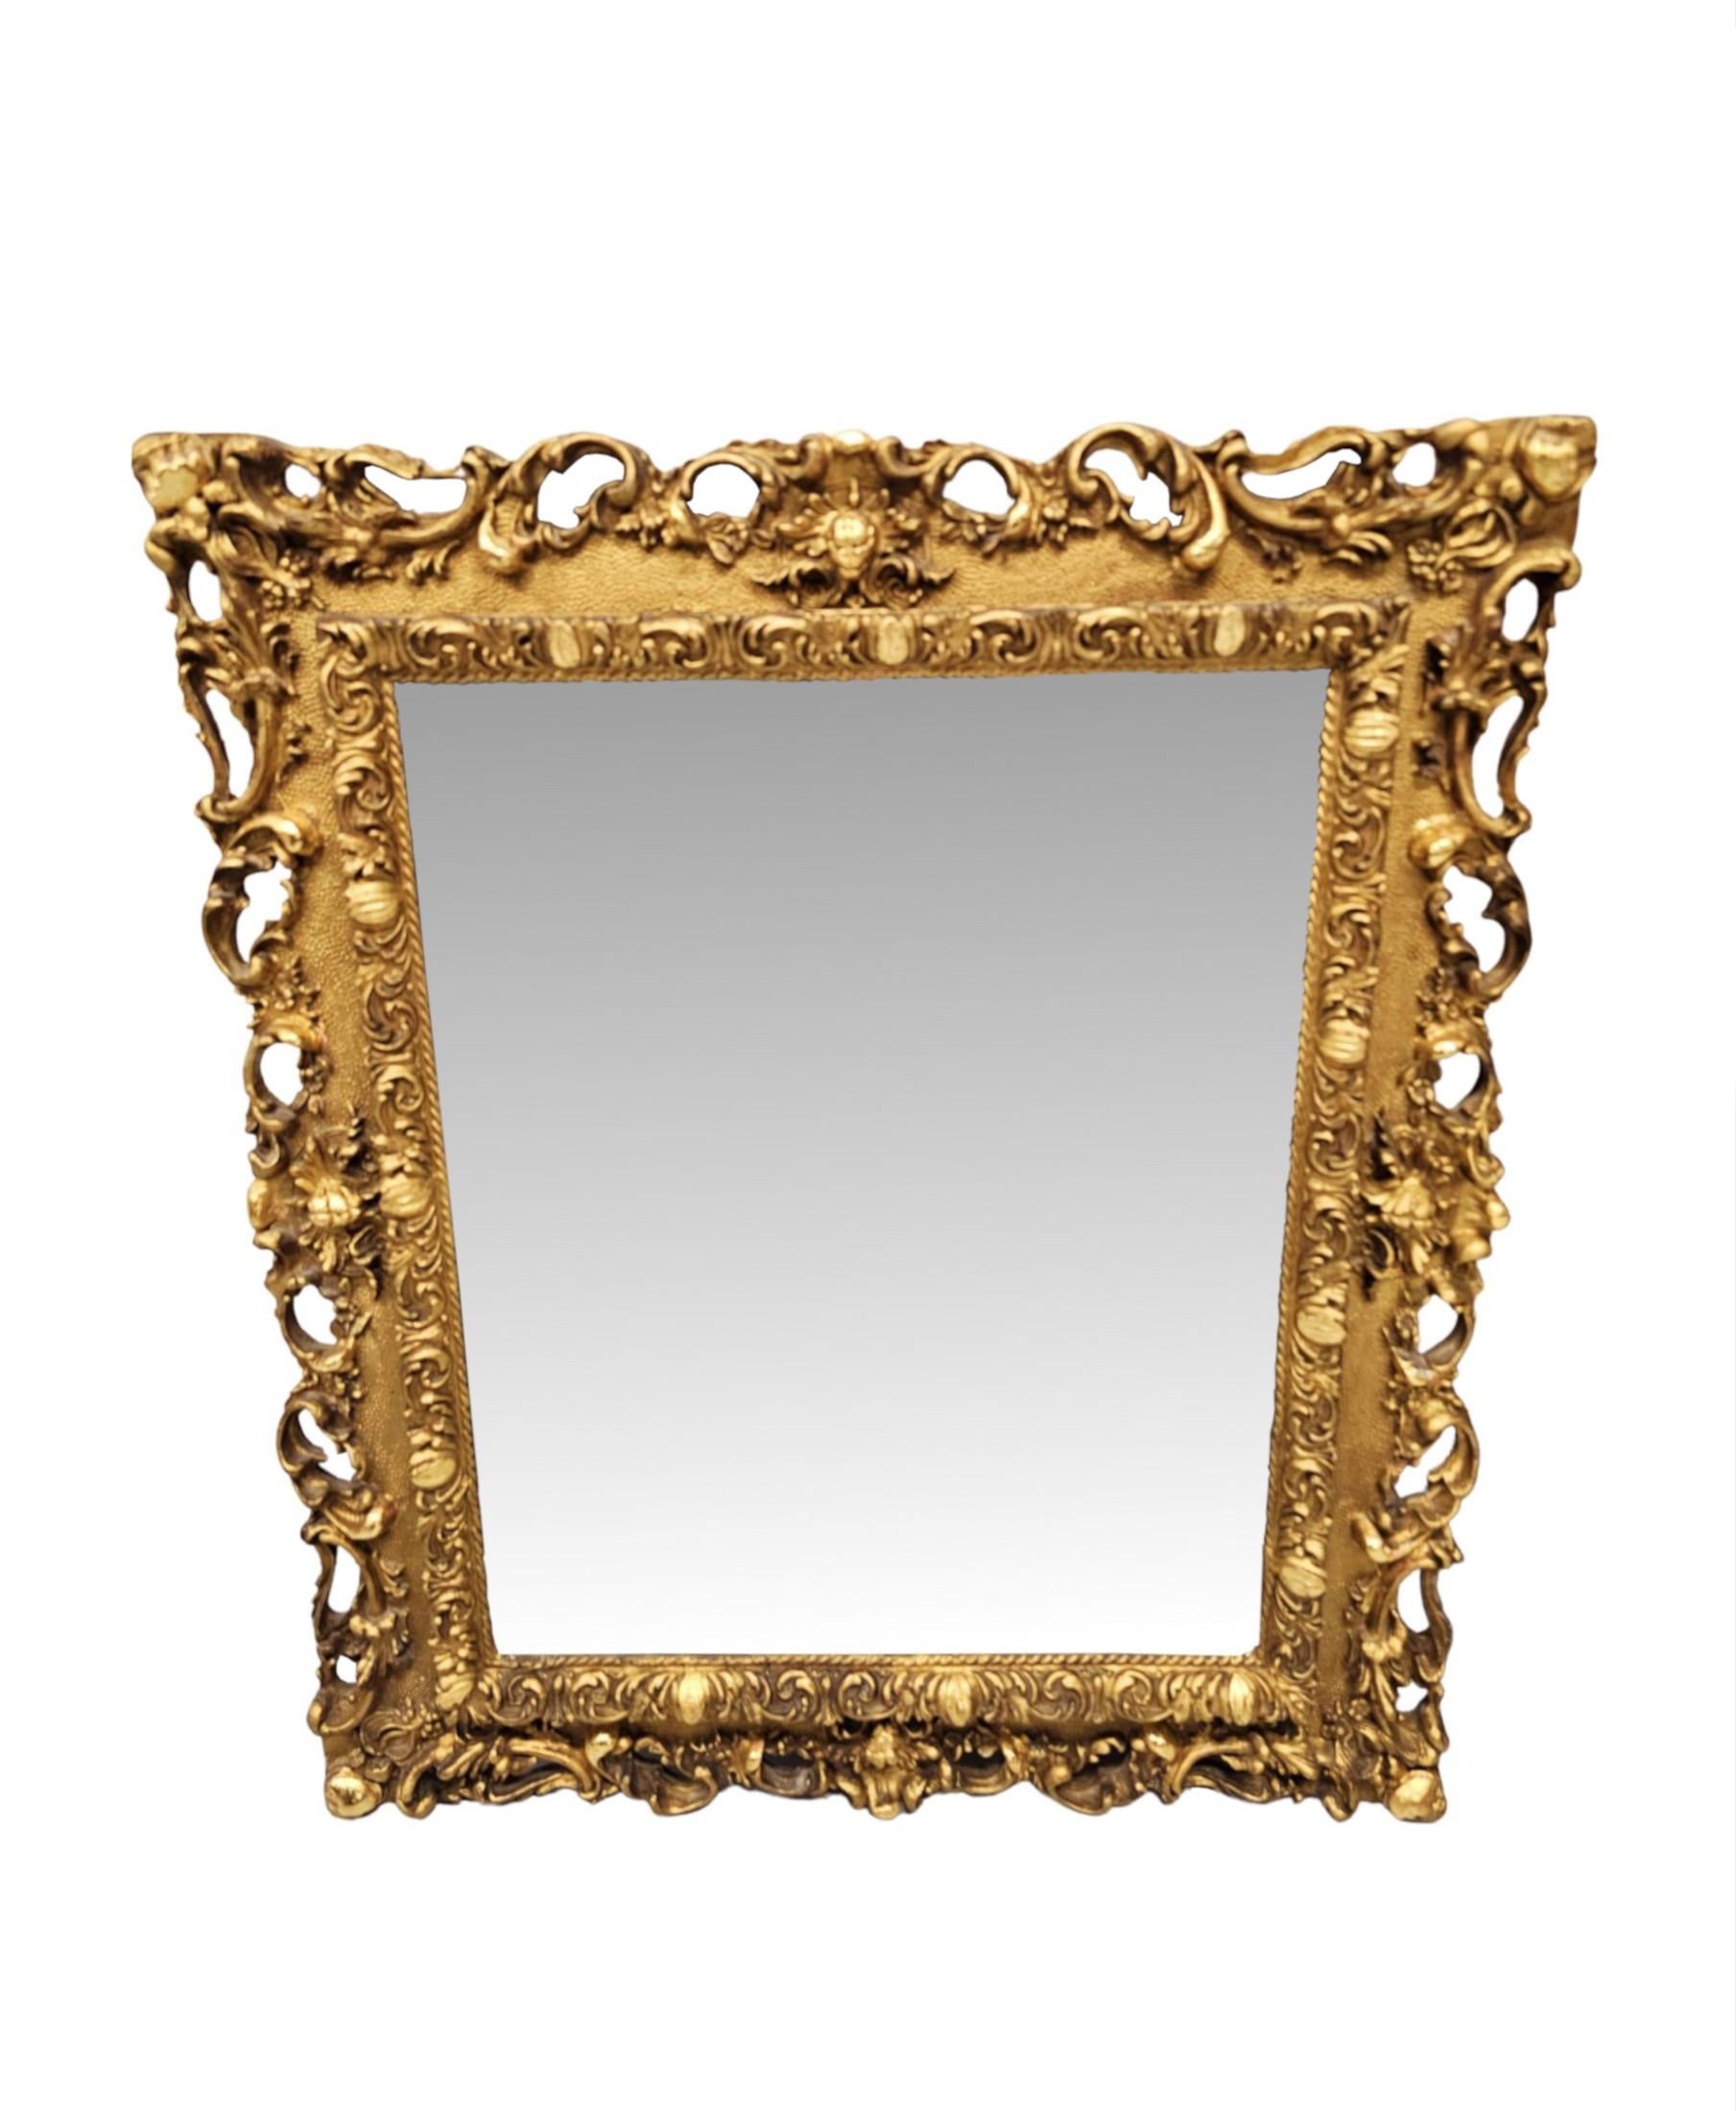 A very rare pair of late 19th Century giltwood mirrors finely hand carved and of exceptional quality.  The original bevelled mirror glass plate of rectangular form is set within a stunningly ornate, pierced and moulded giltwood frame with sanded